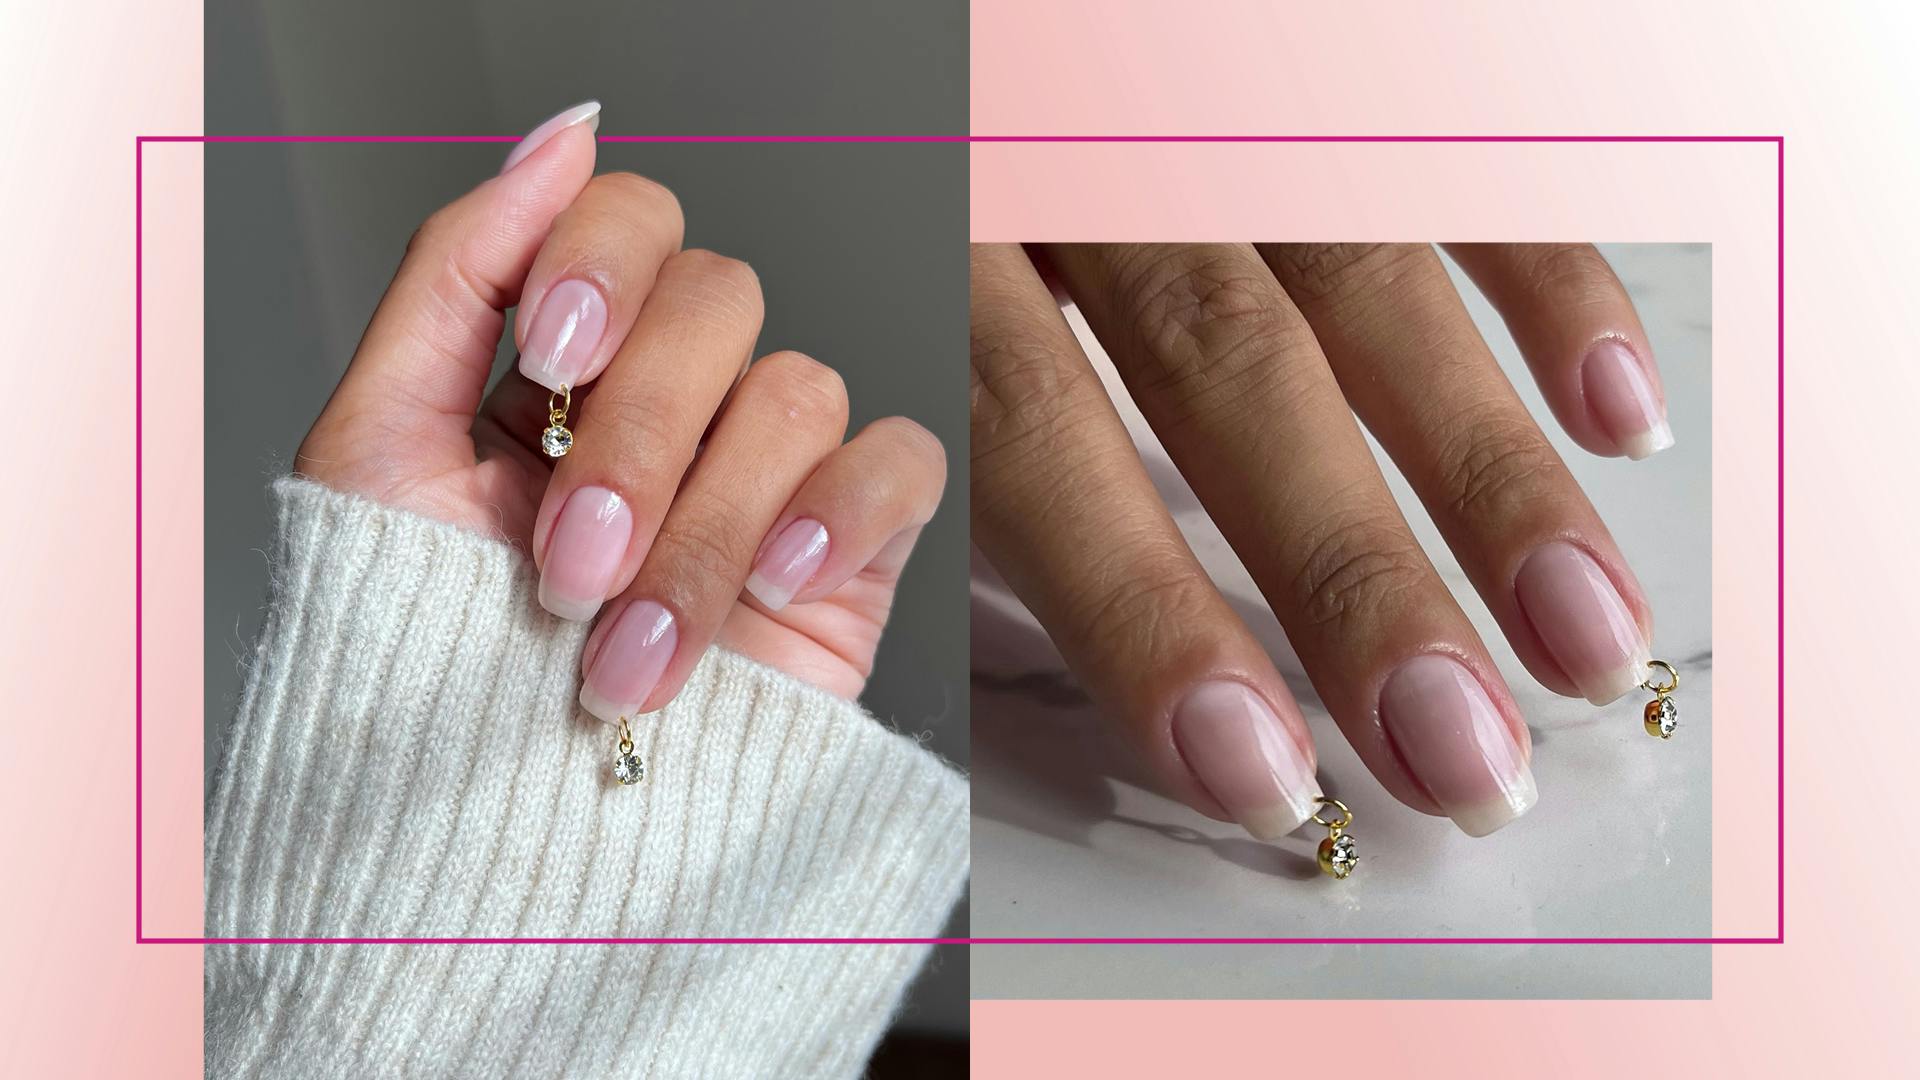 The Coolest Nail Piercings on Instagram | Nail piercing, Nails, Nail trends